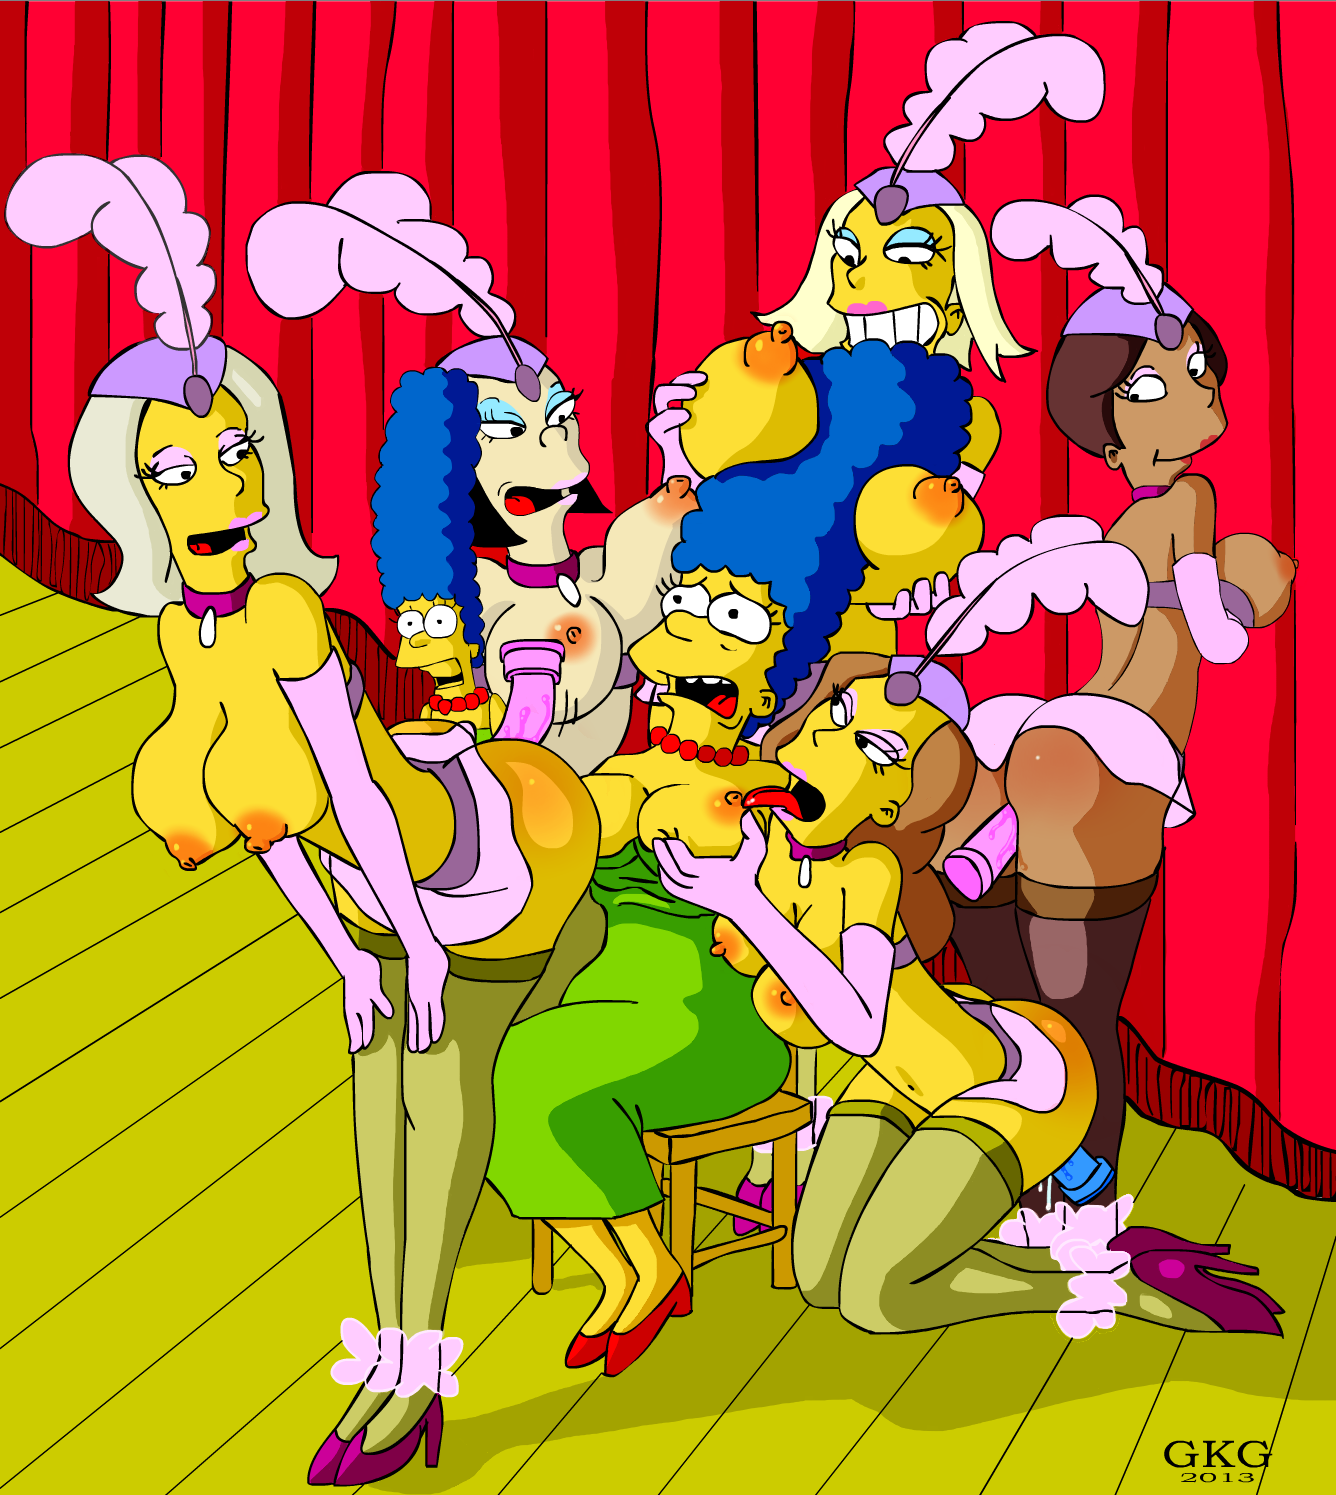 #pic1132298: GKG - Marge Simpson - The Simpsons - Twiggy.